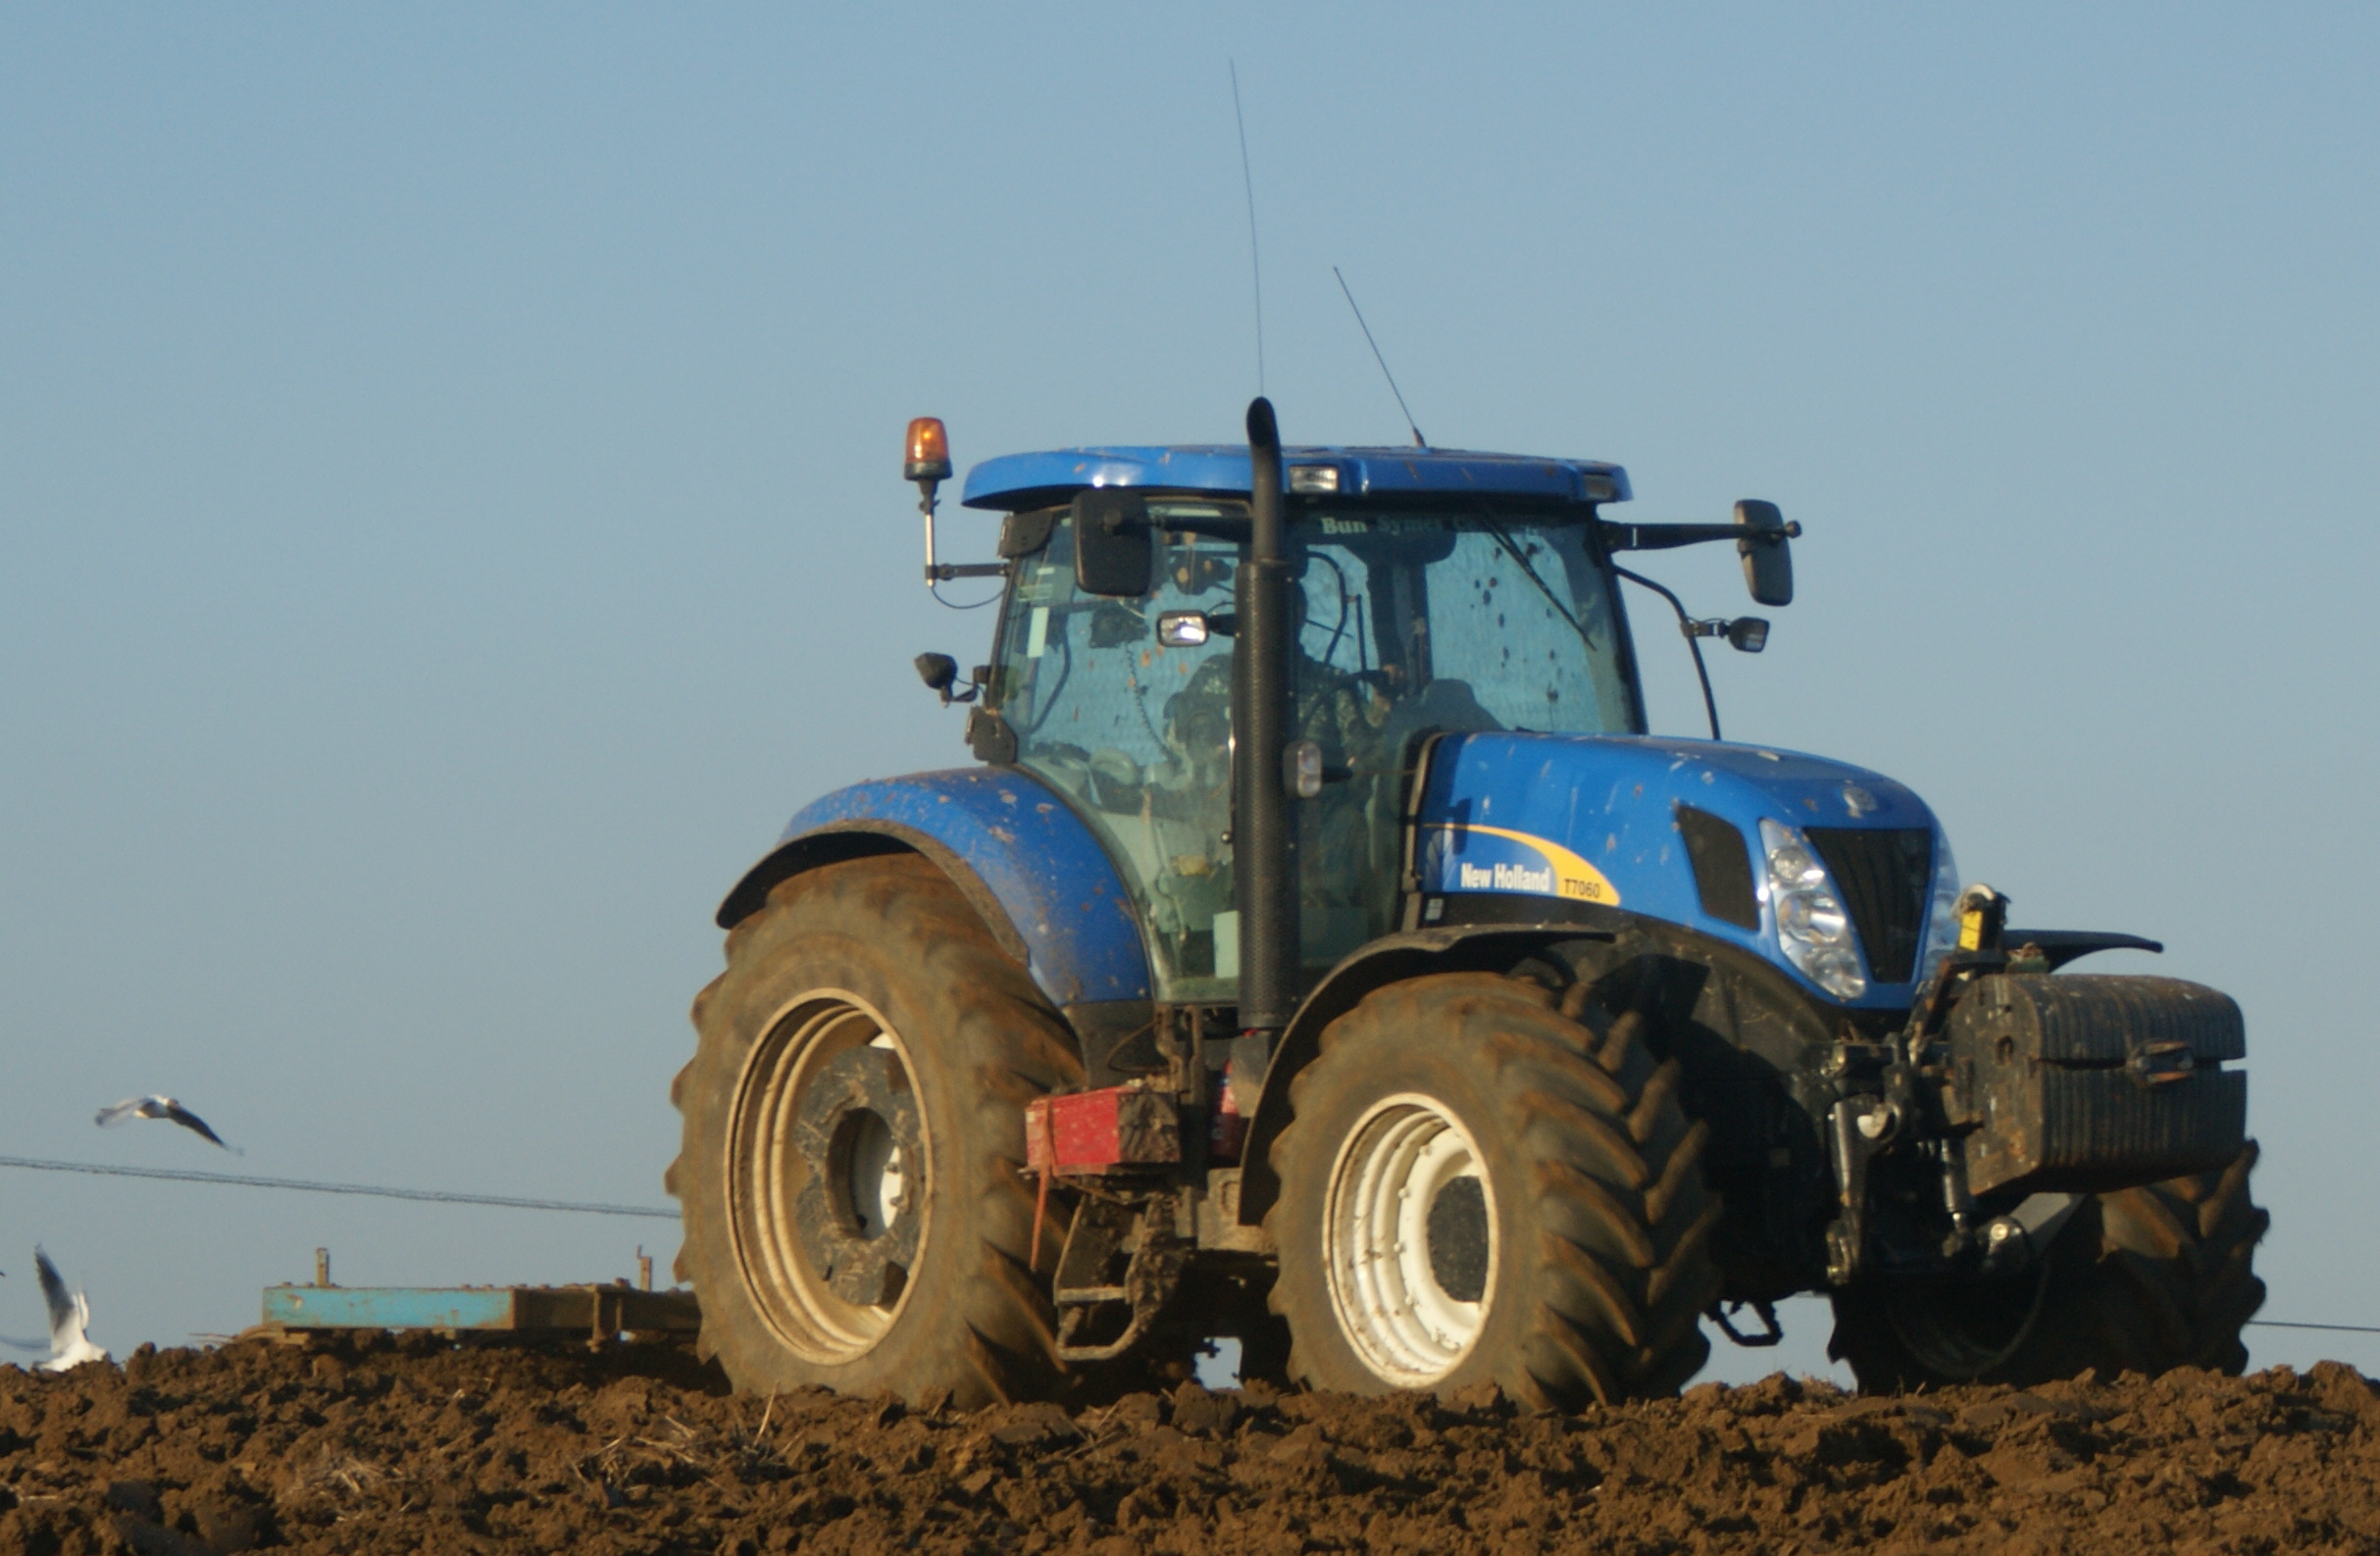 Description New Holland T7060, Sandford Farm fields being cultivated ...